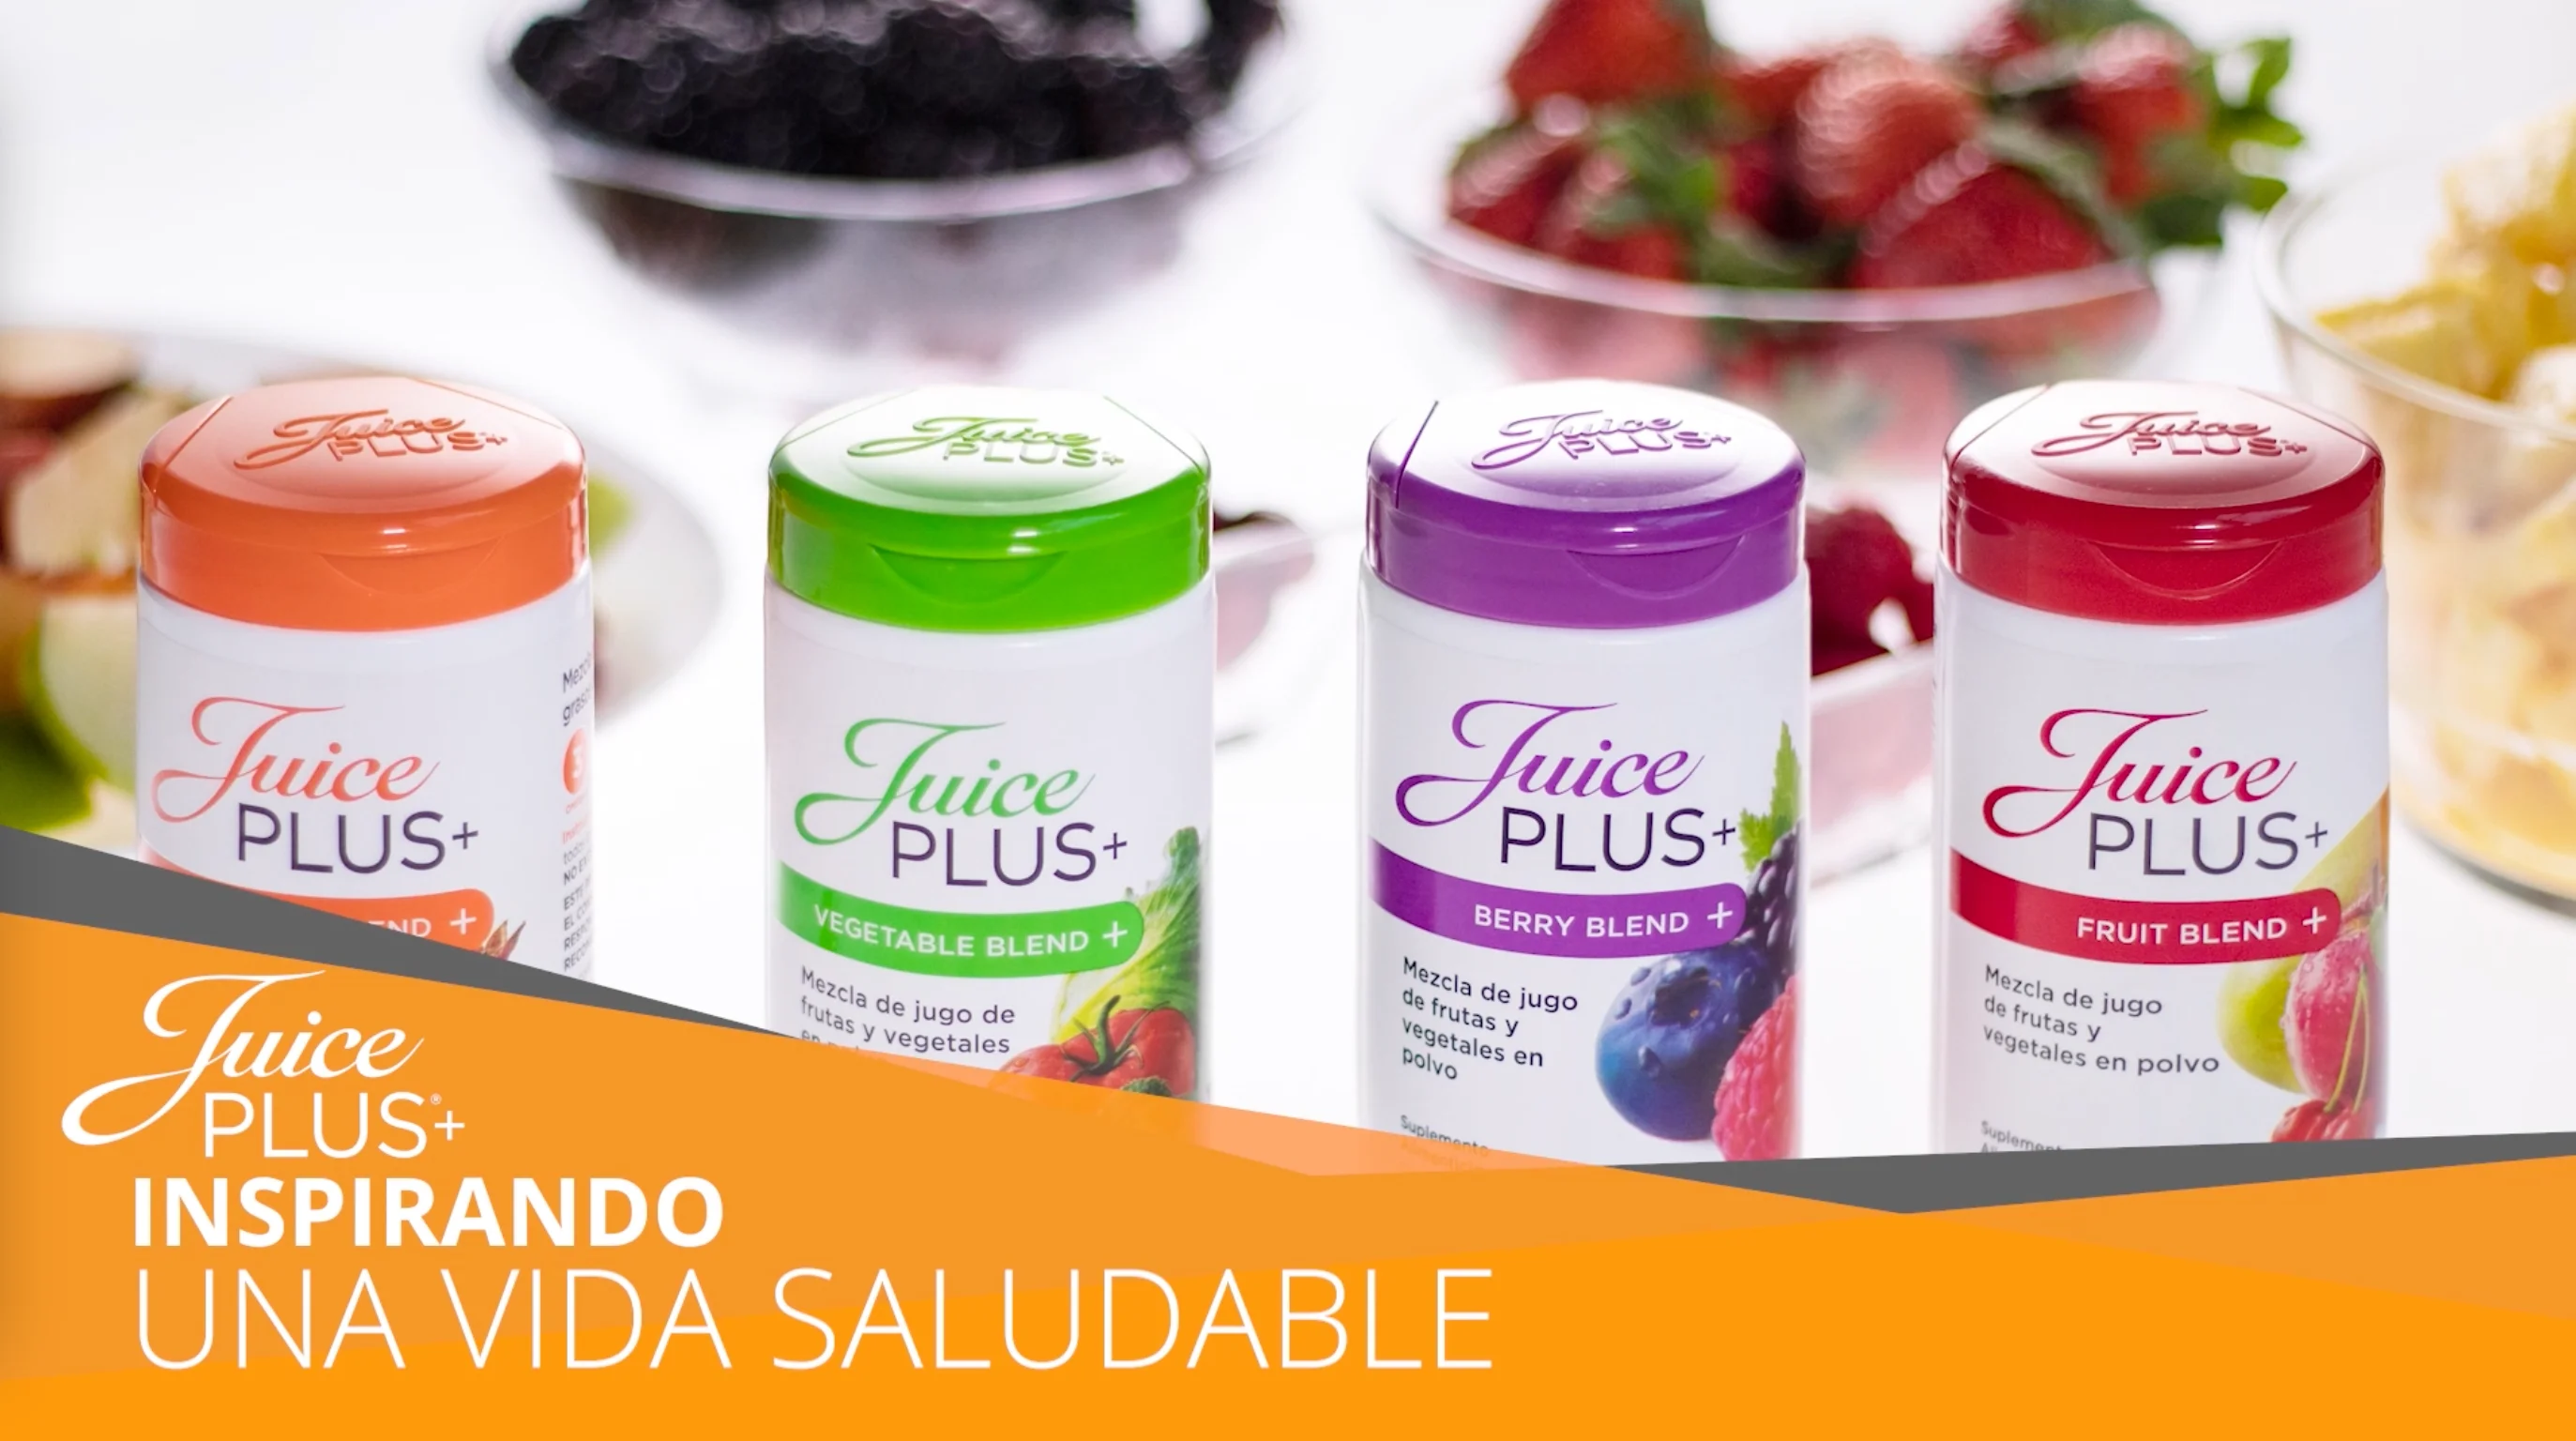 Why I recommend Juice Plus+